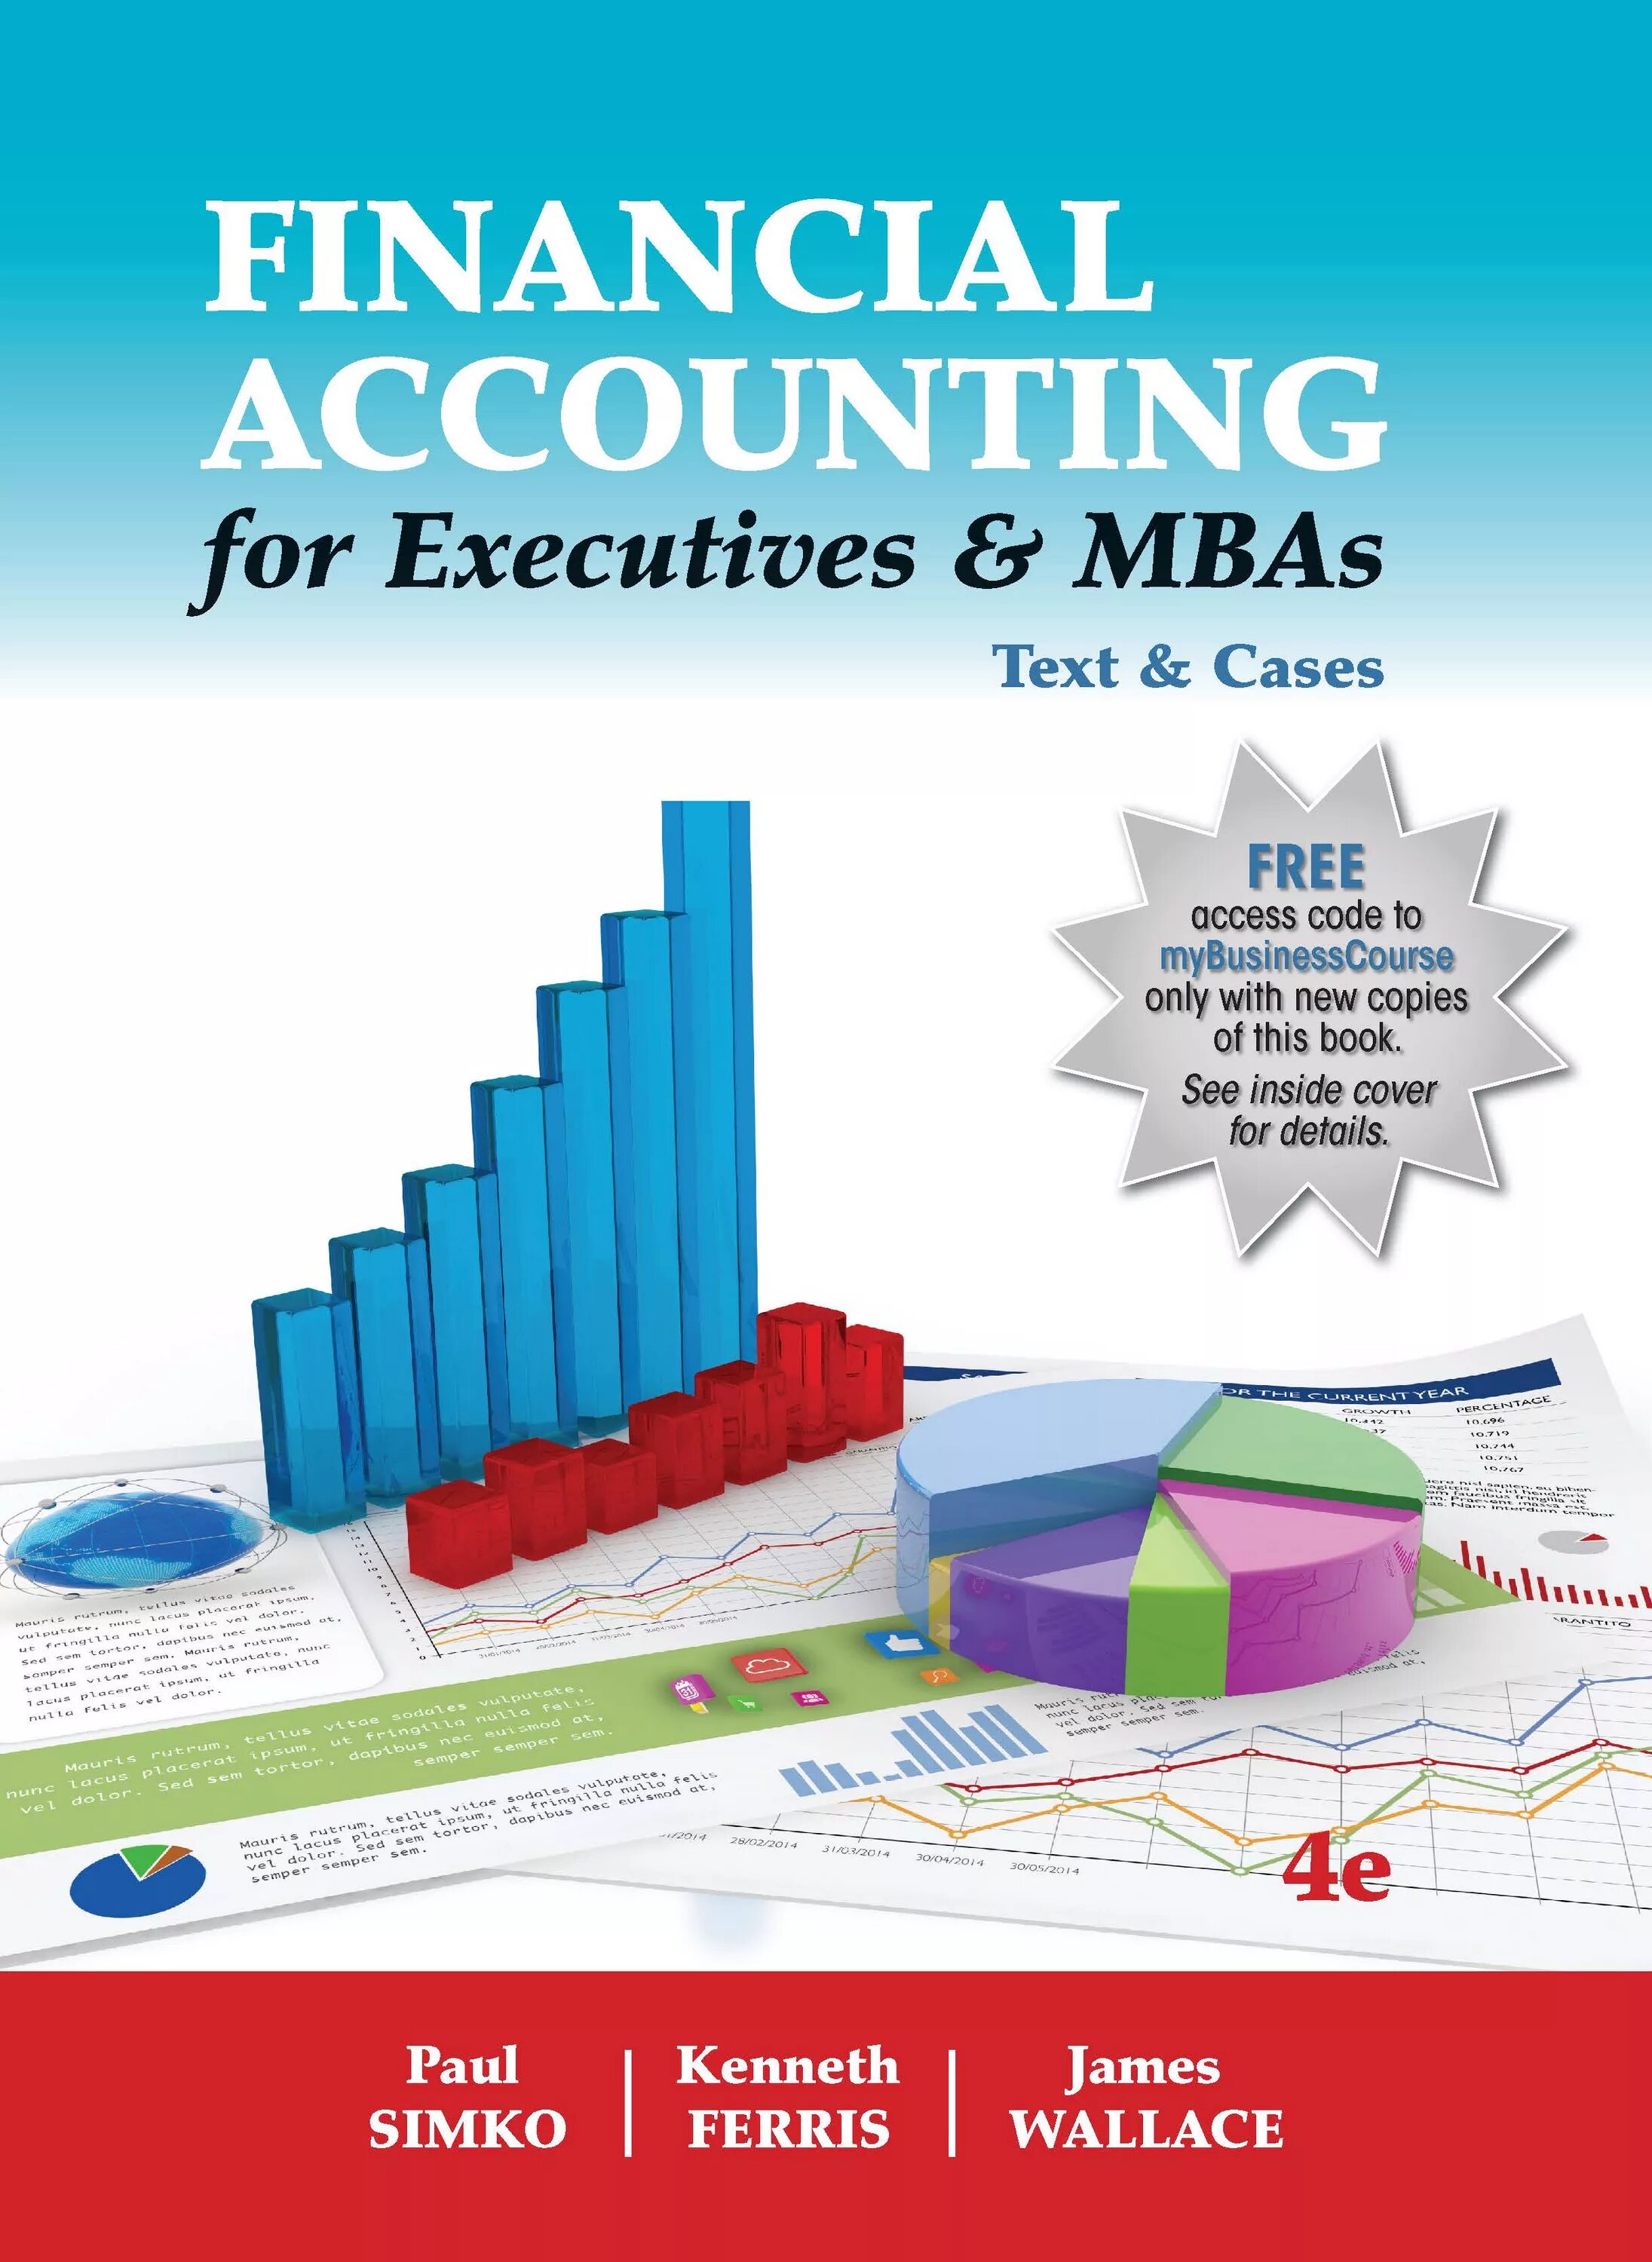 Accounting book. Financial Accounting. Books for Accounting. Accounting учебник. Financial Accounting book Cover.